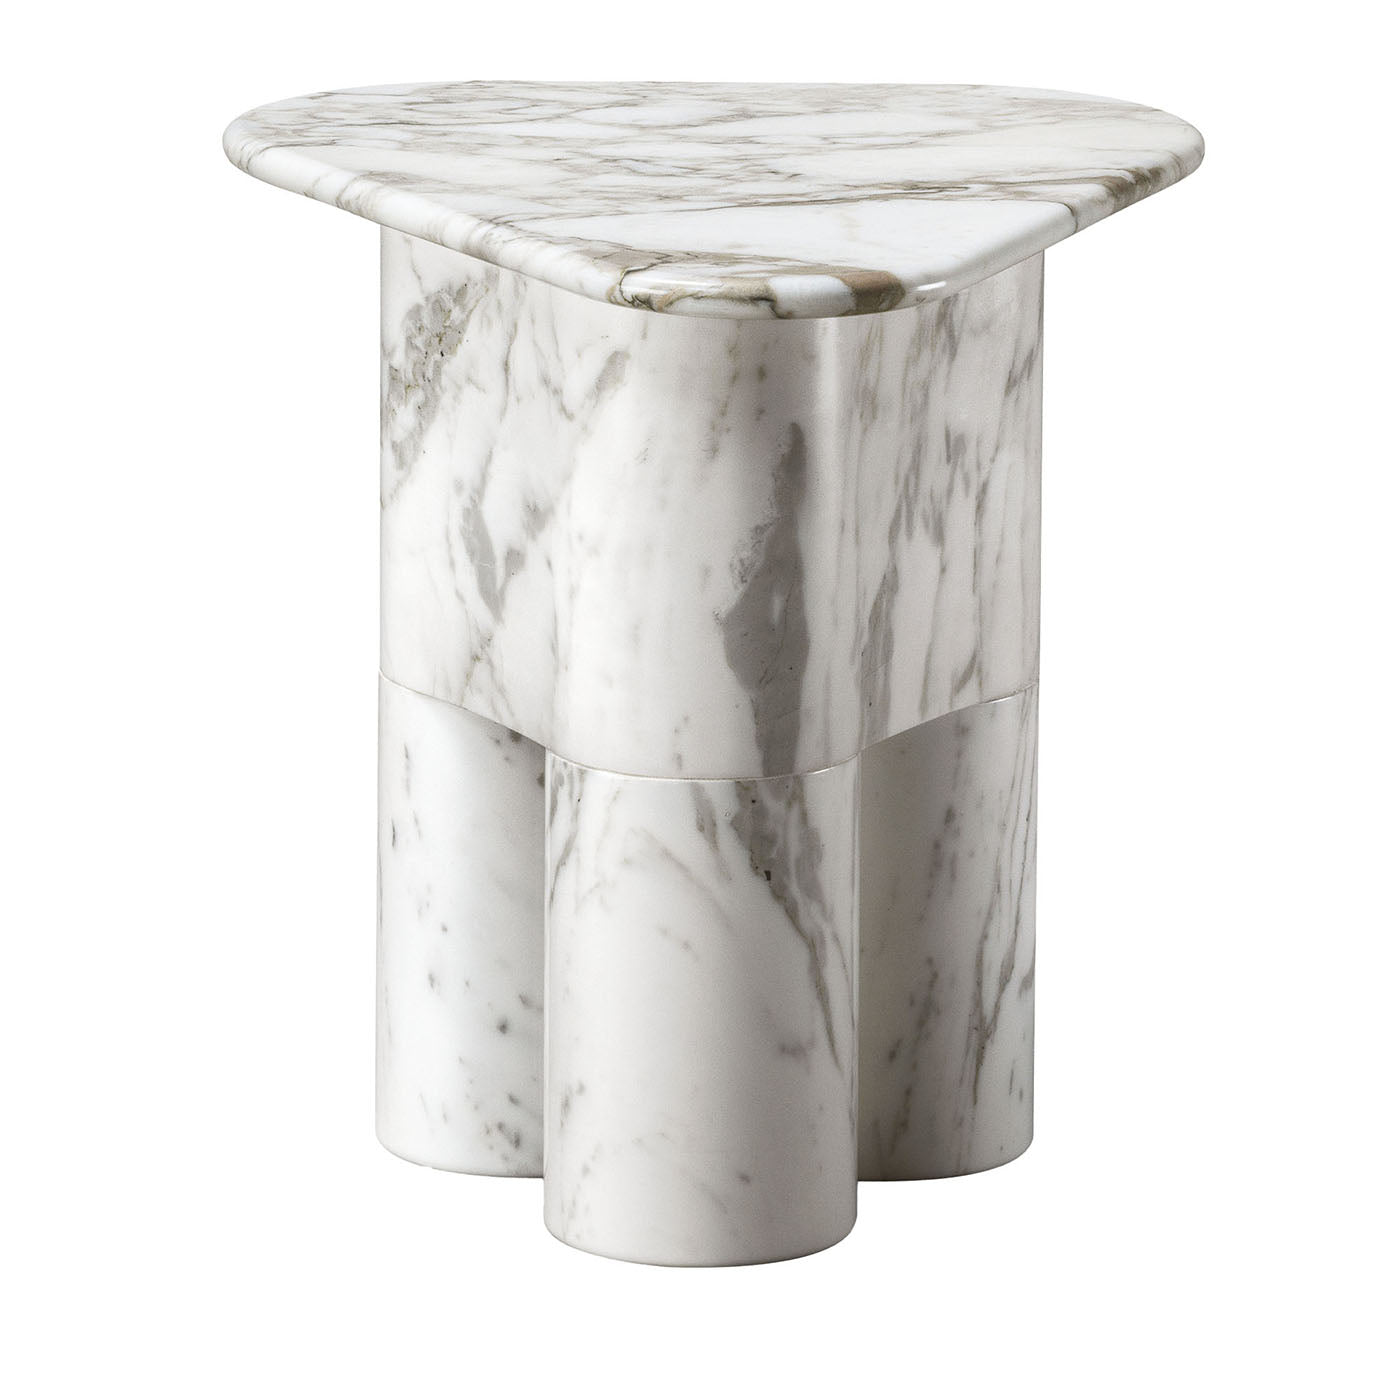 Tria Small White Marble Side Table by Lorenza Bozzoli - Main view